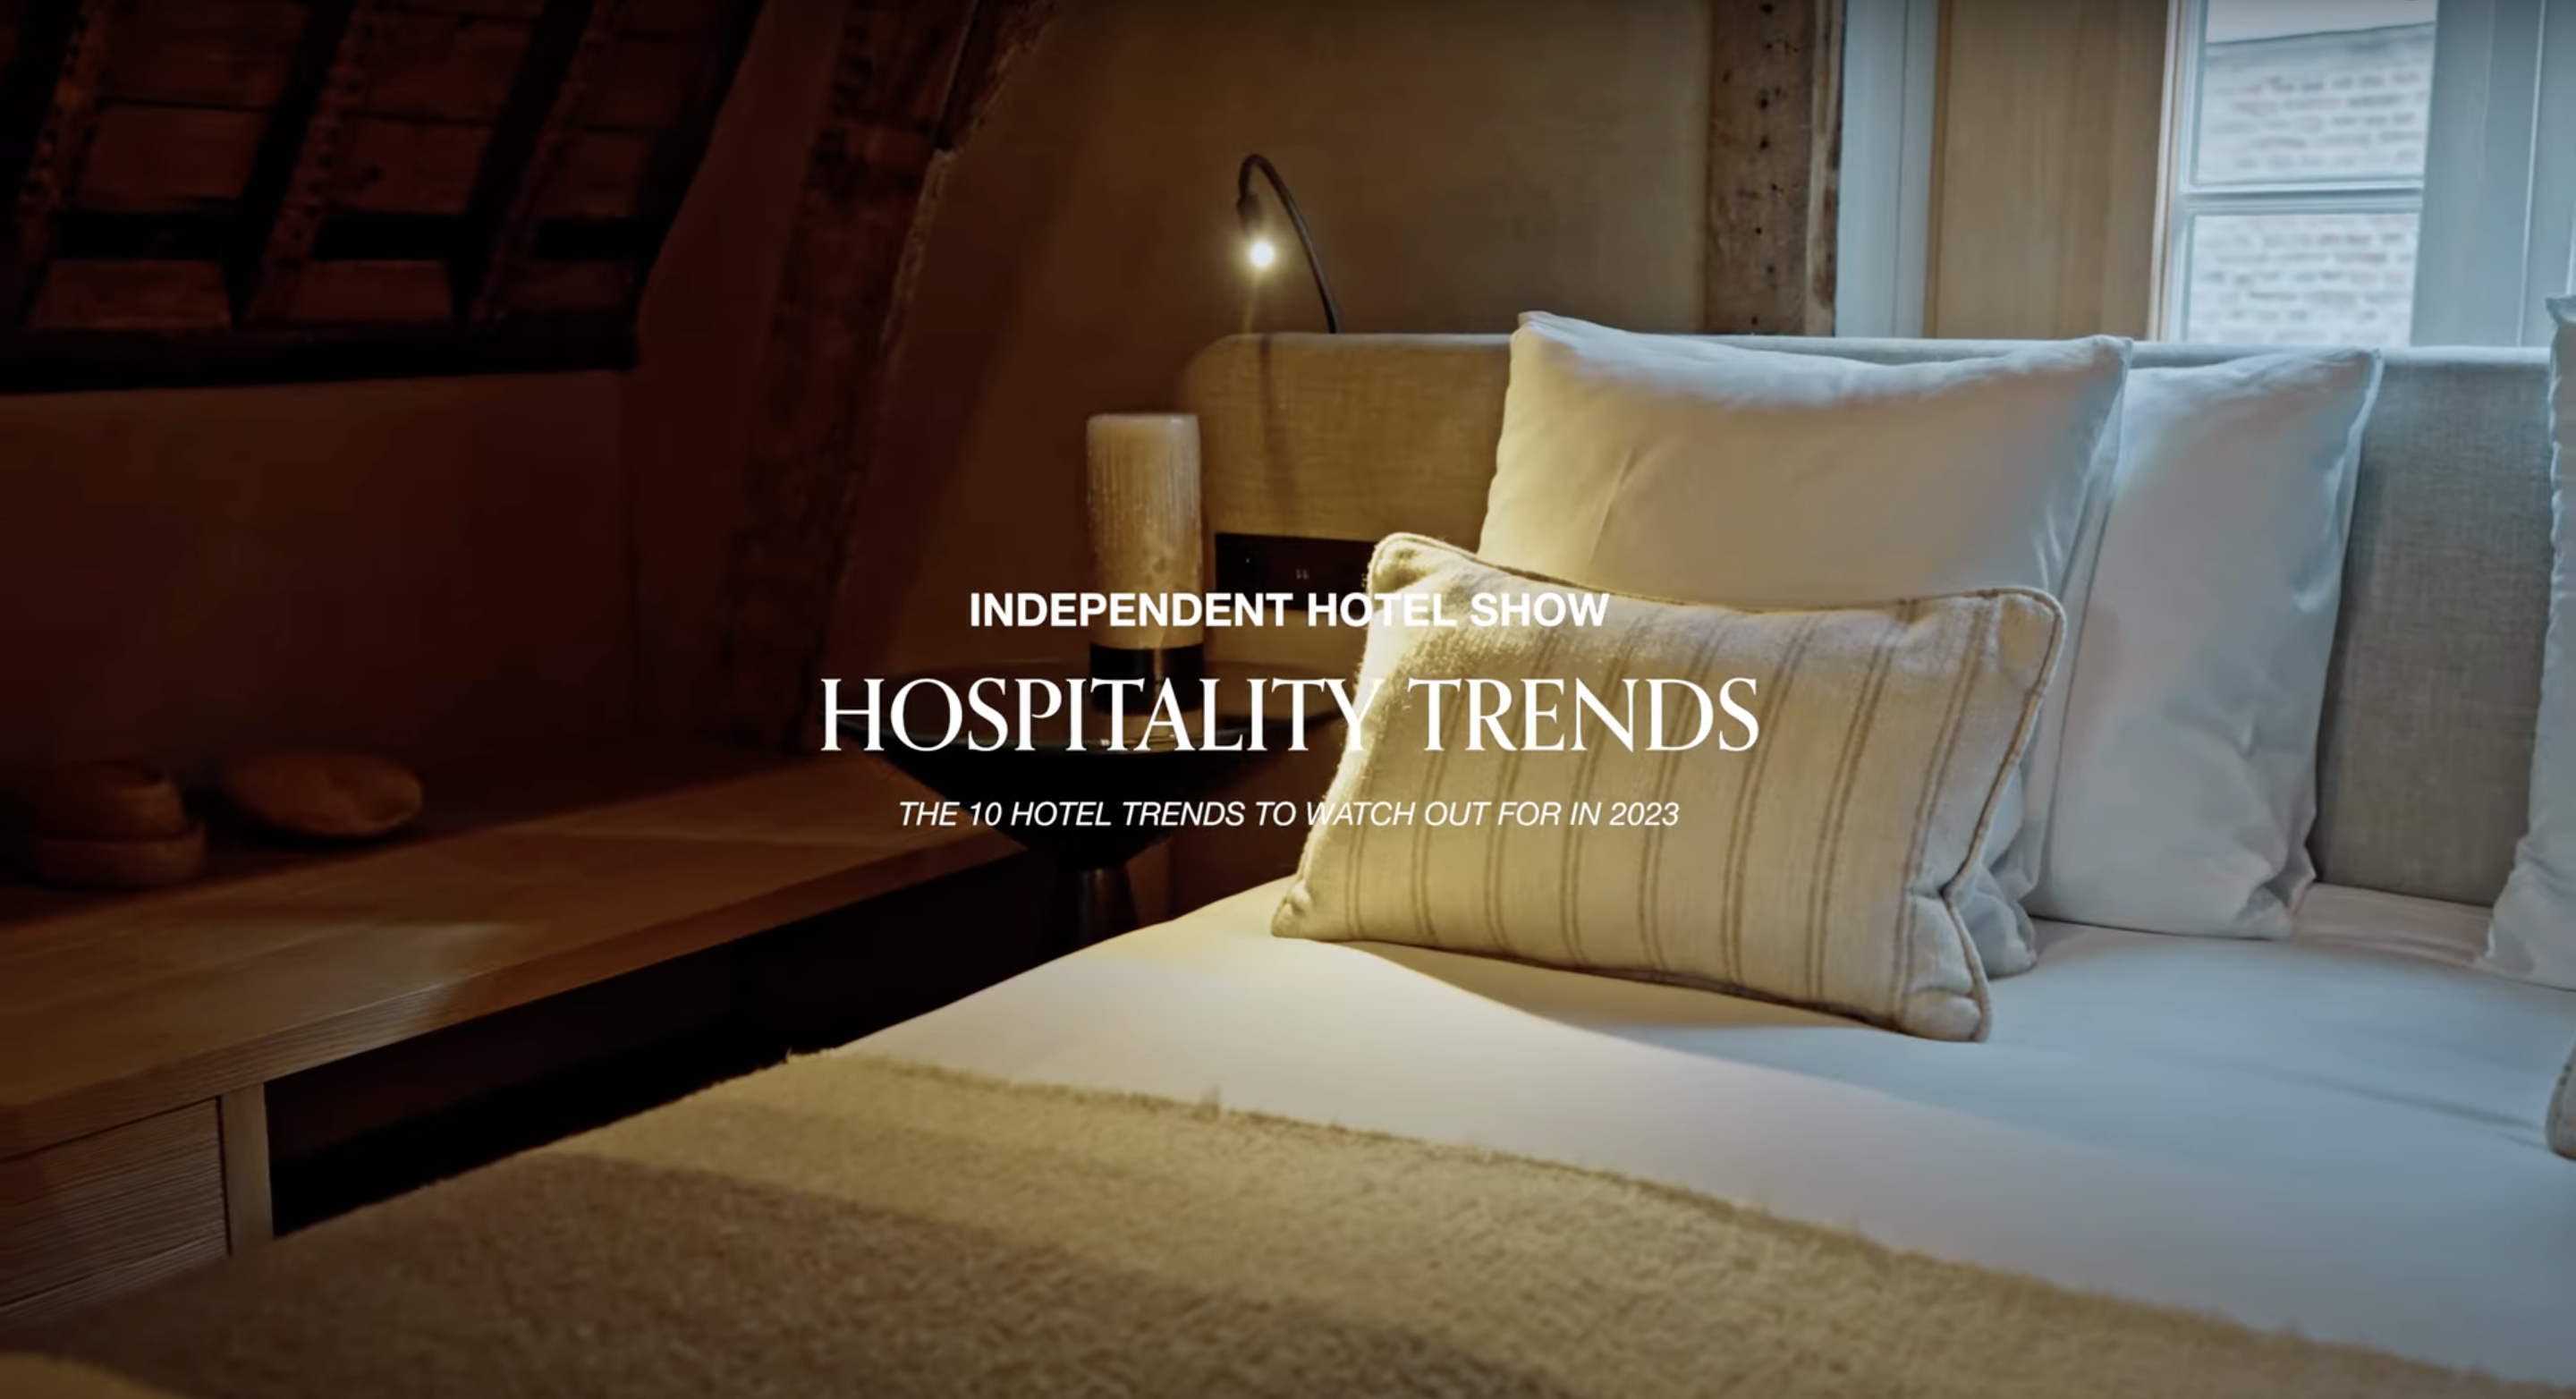 Independent Hotel Show - 10 Hospitality Trends